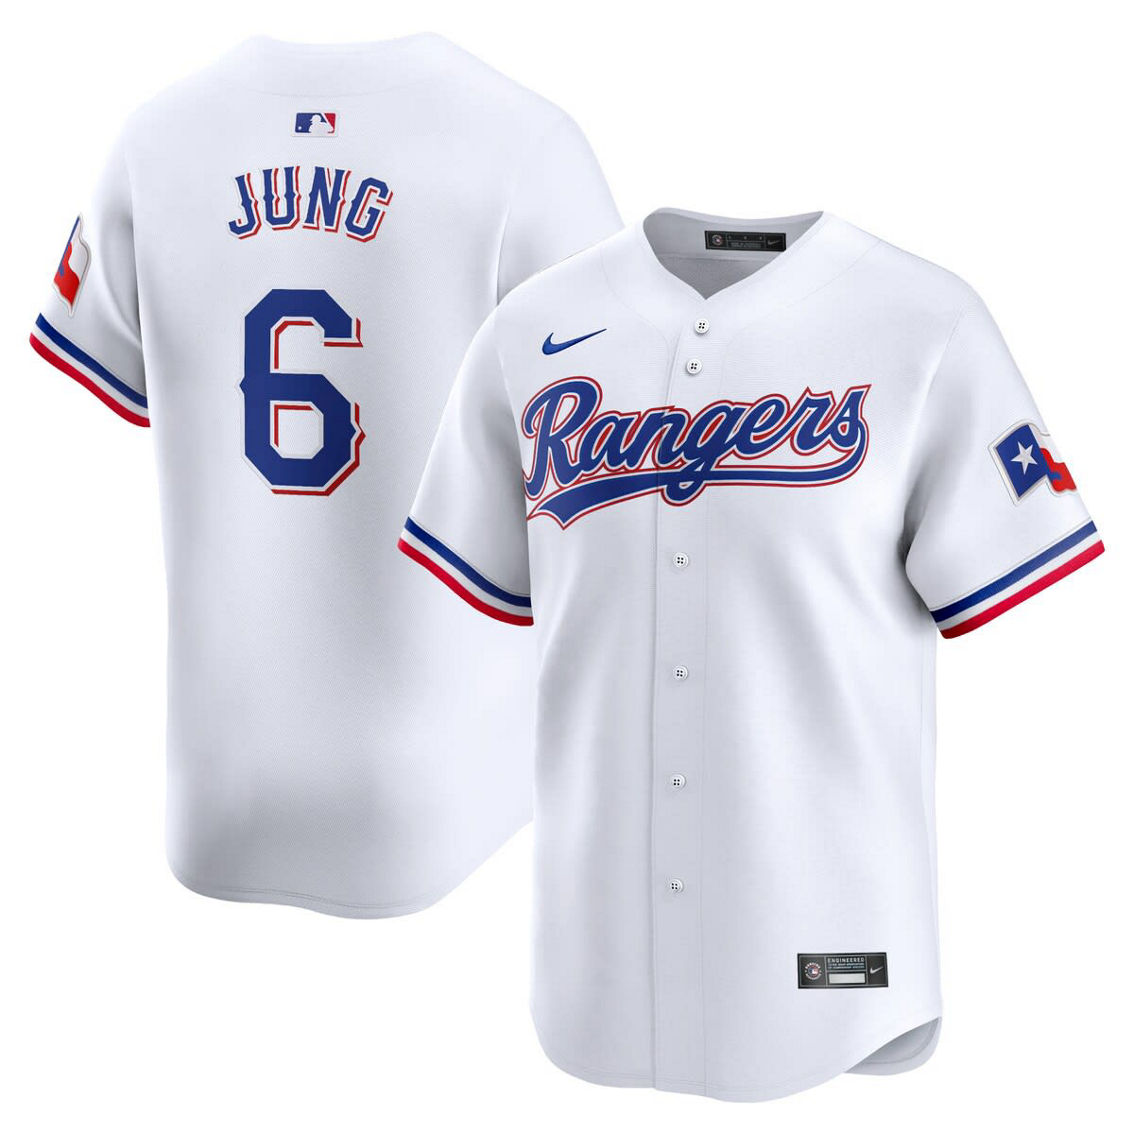 Nike Men's Josh Jung White Texas Rangers Home Limited Player Jersey - Image 2 of 4